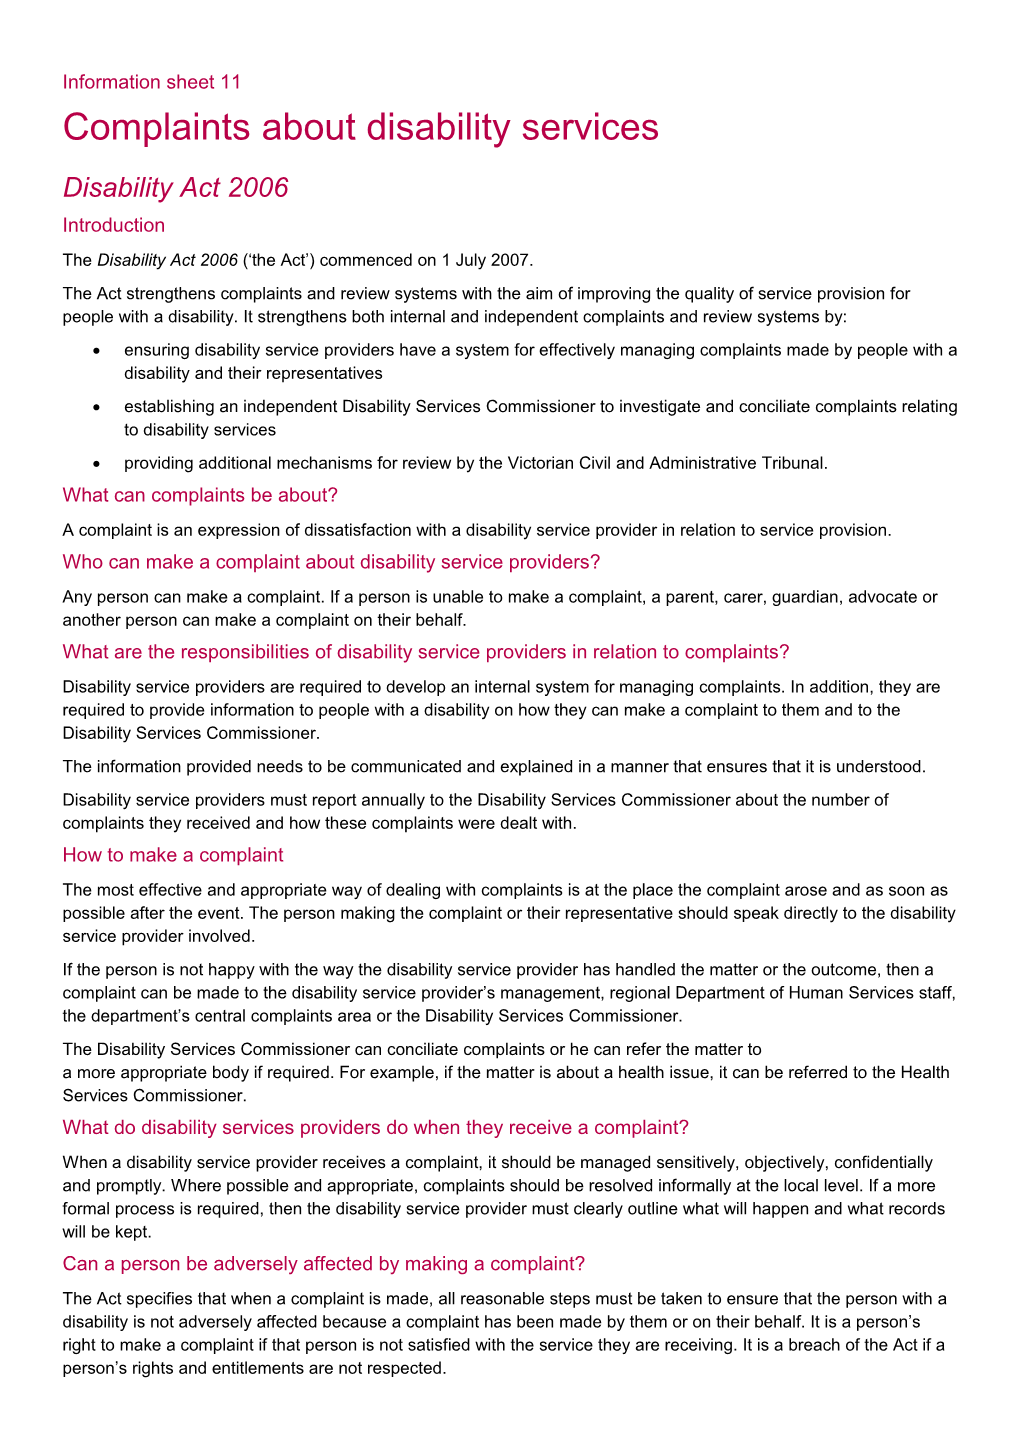 Complaints About Disability Services - Disability Act 2006 Information Sheet for Service